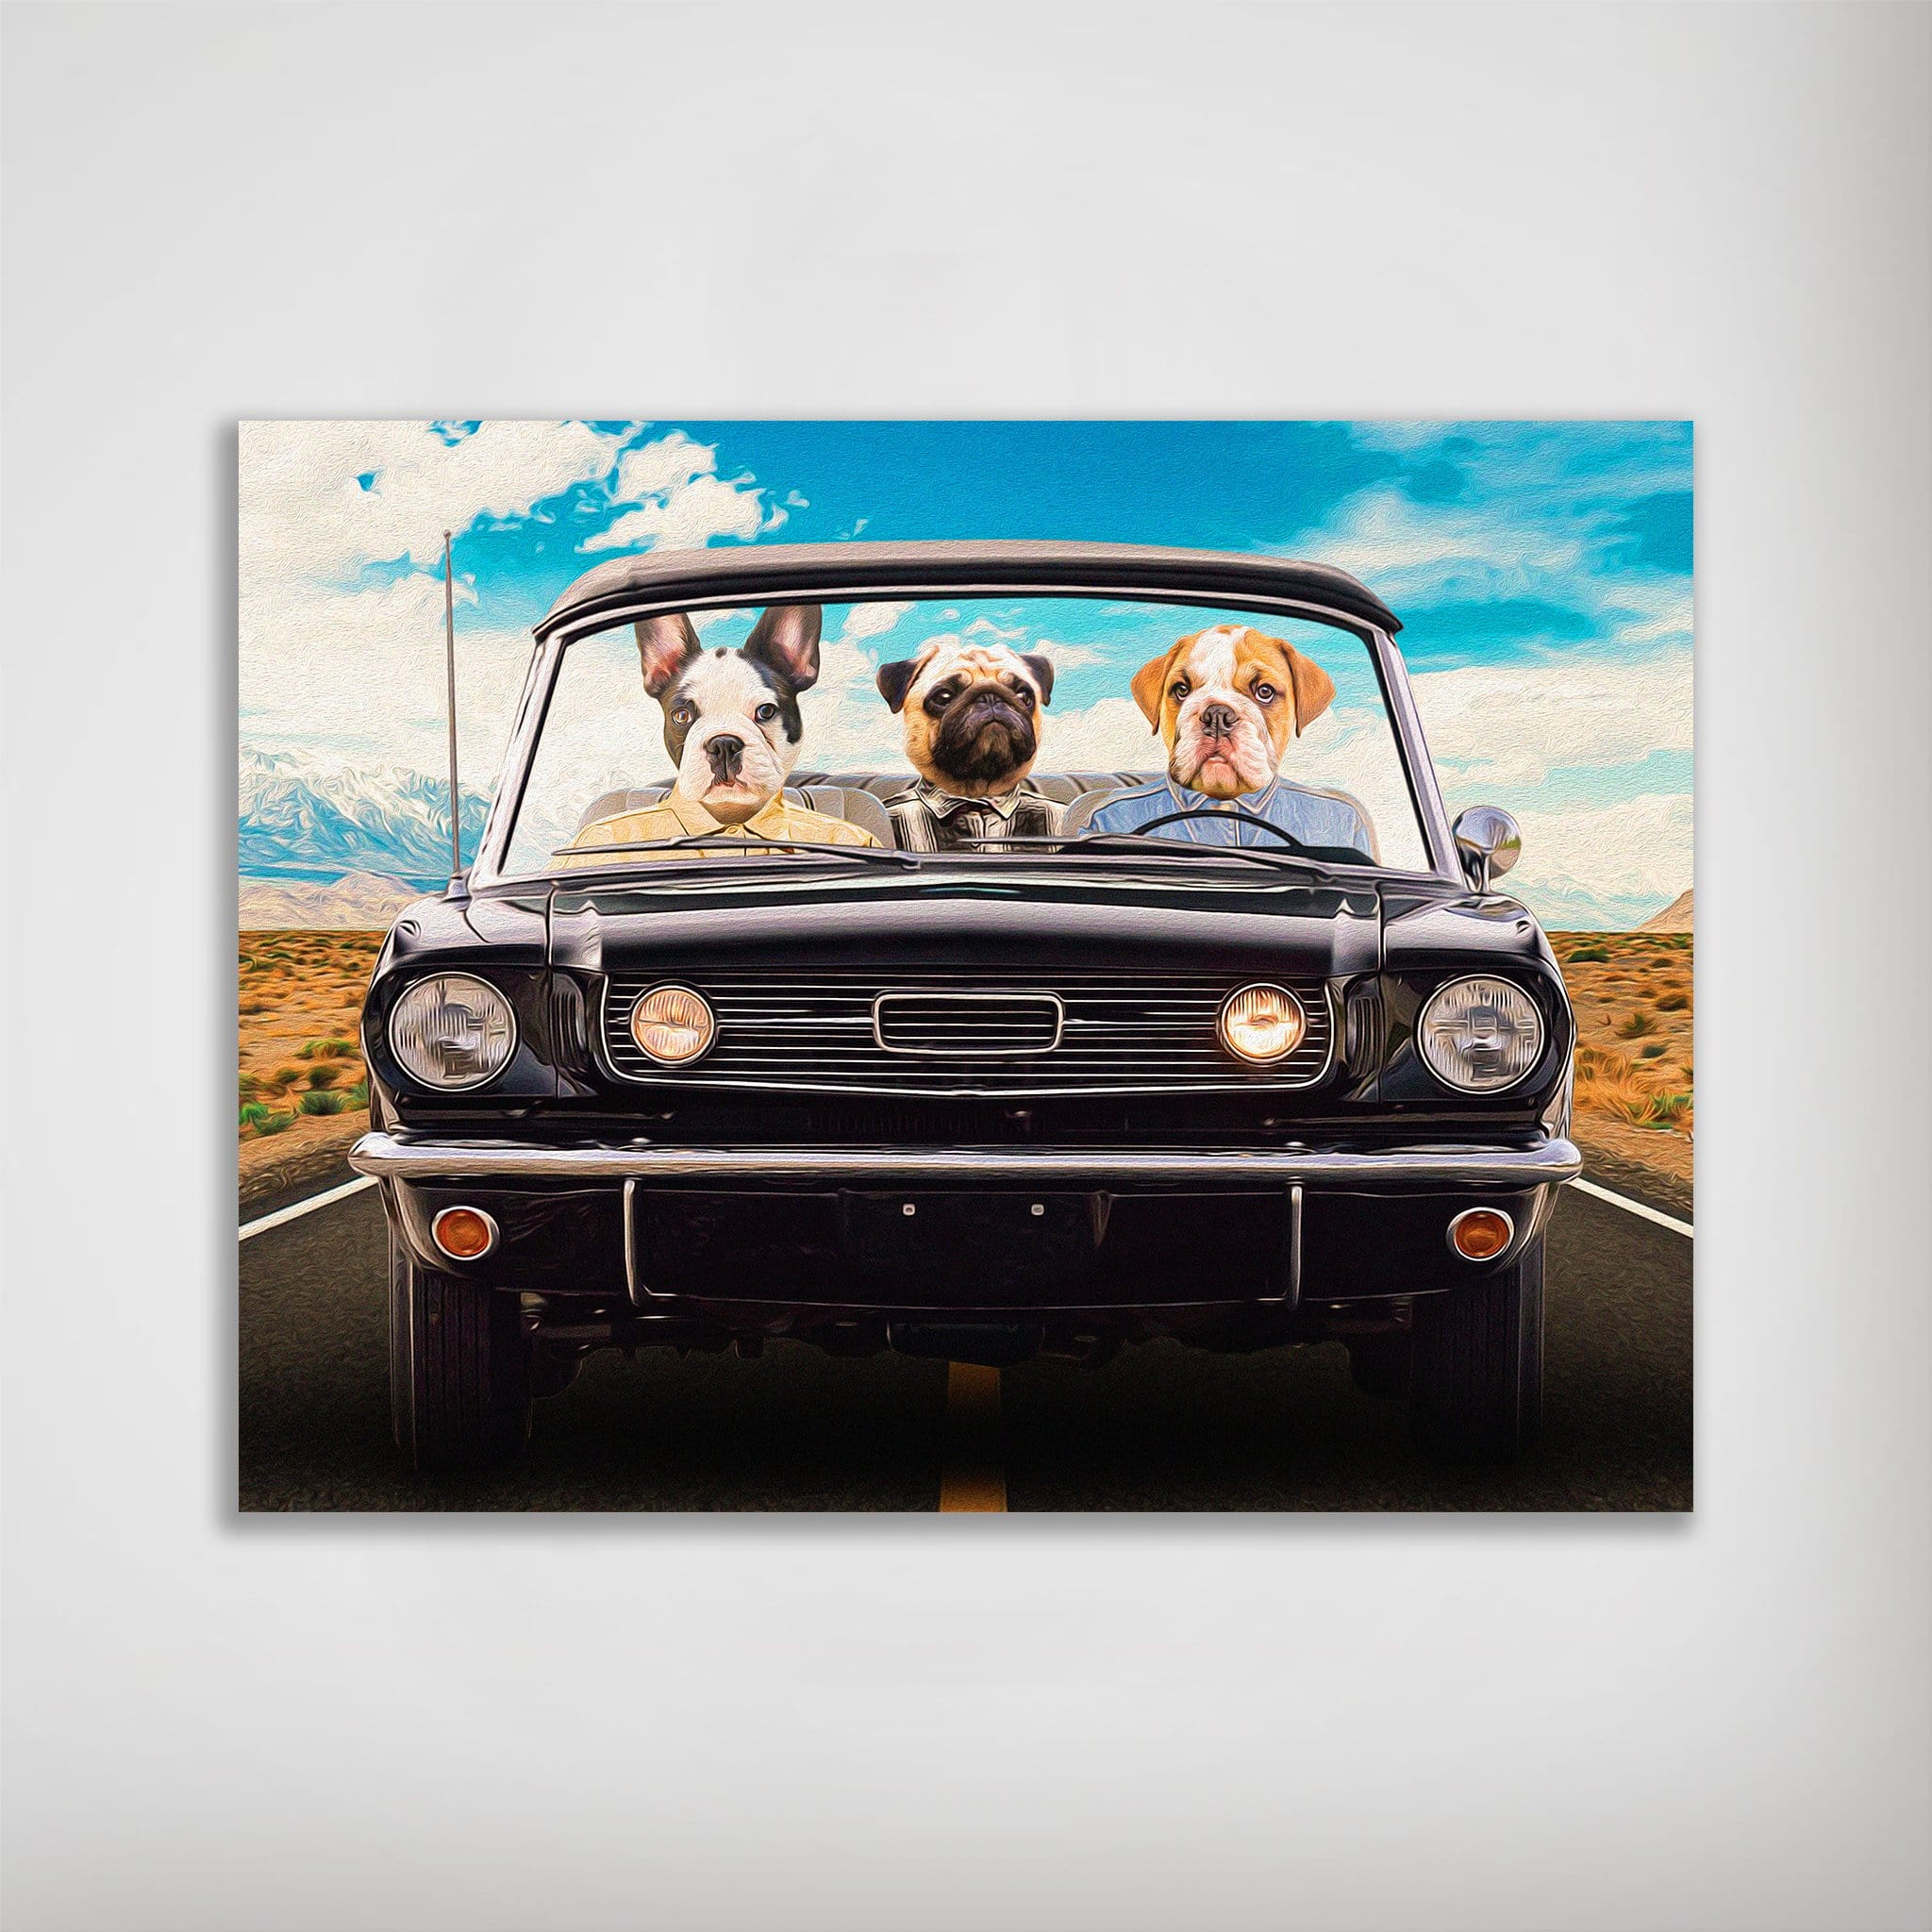 Póster personalizado con 3 mascotas &#39;The Classic Woofstang&#39;